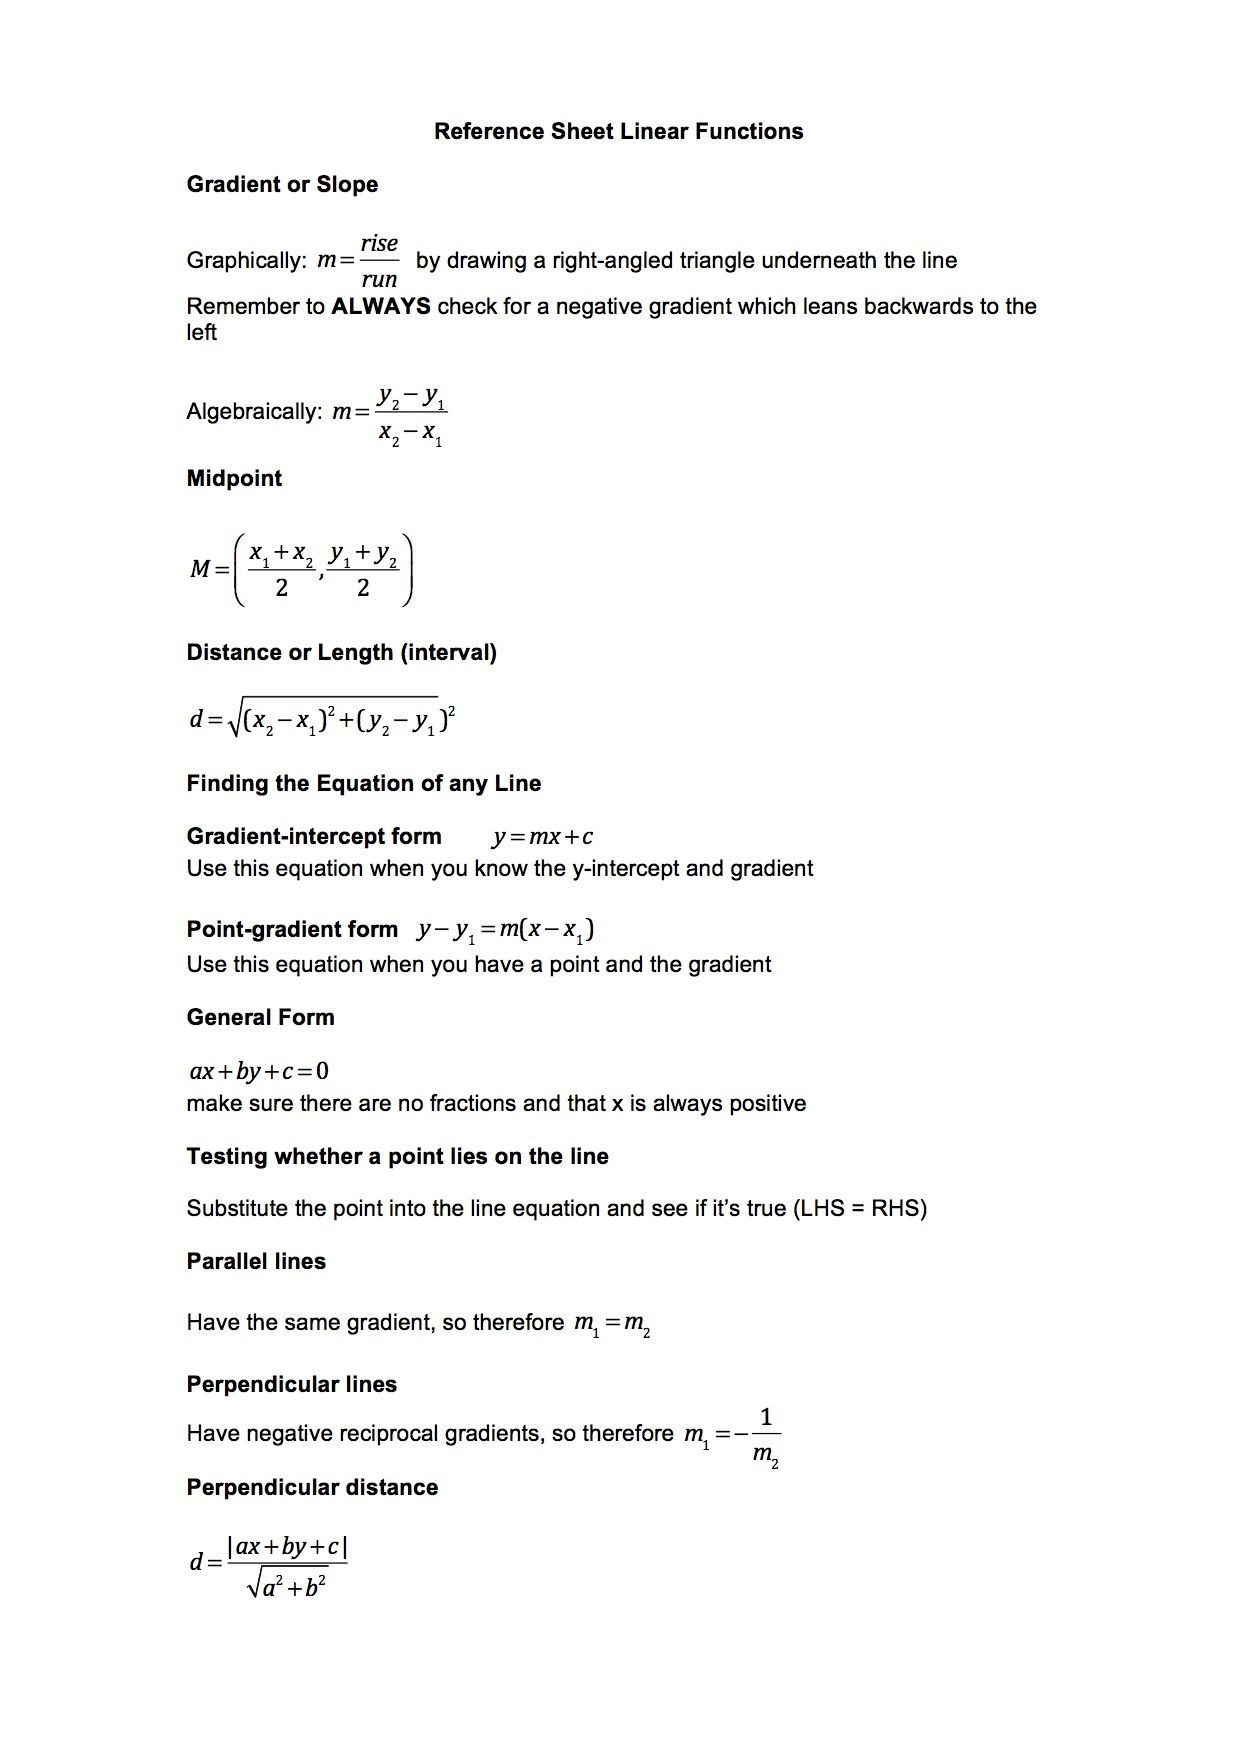 Midpoint and Distance Worksheet formula Sheet or Reference Sheet for Linear Functions or